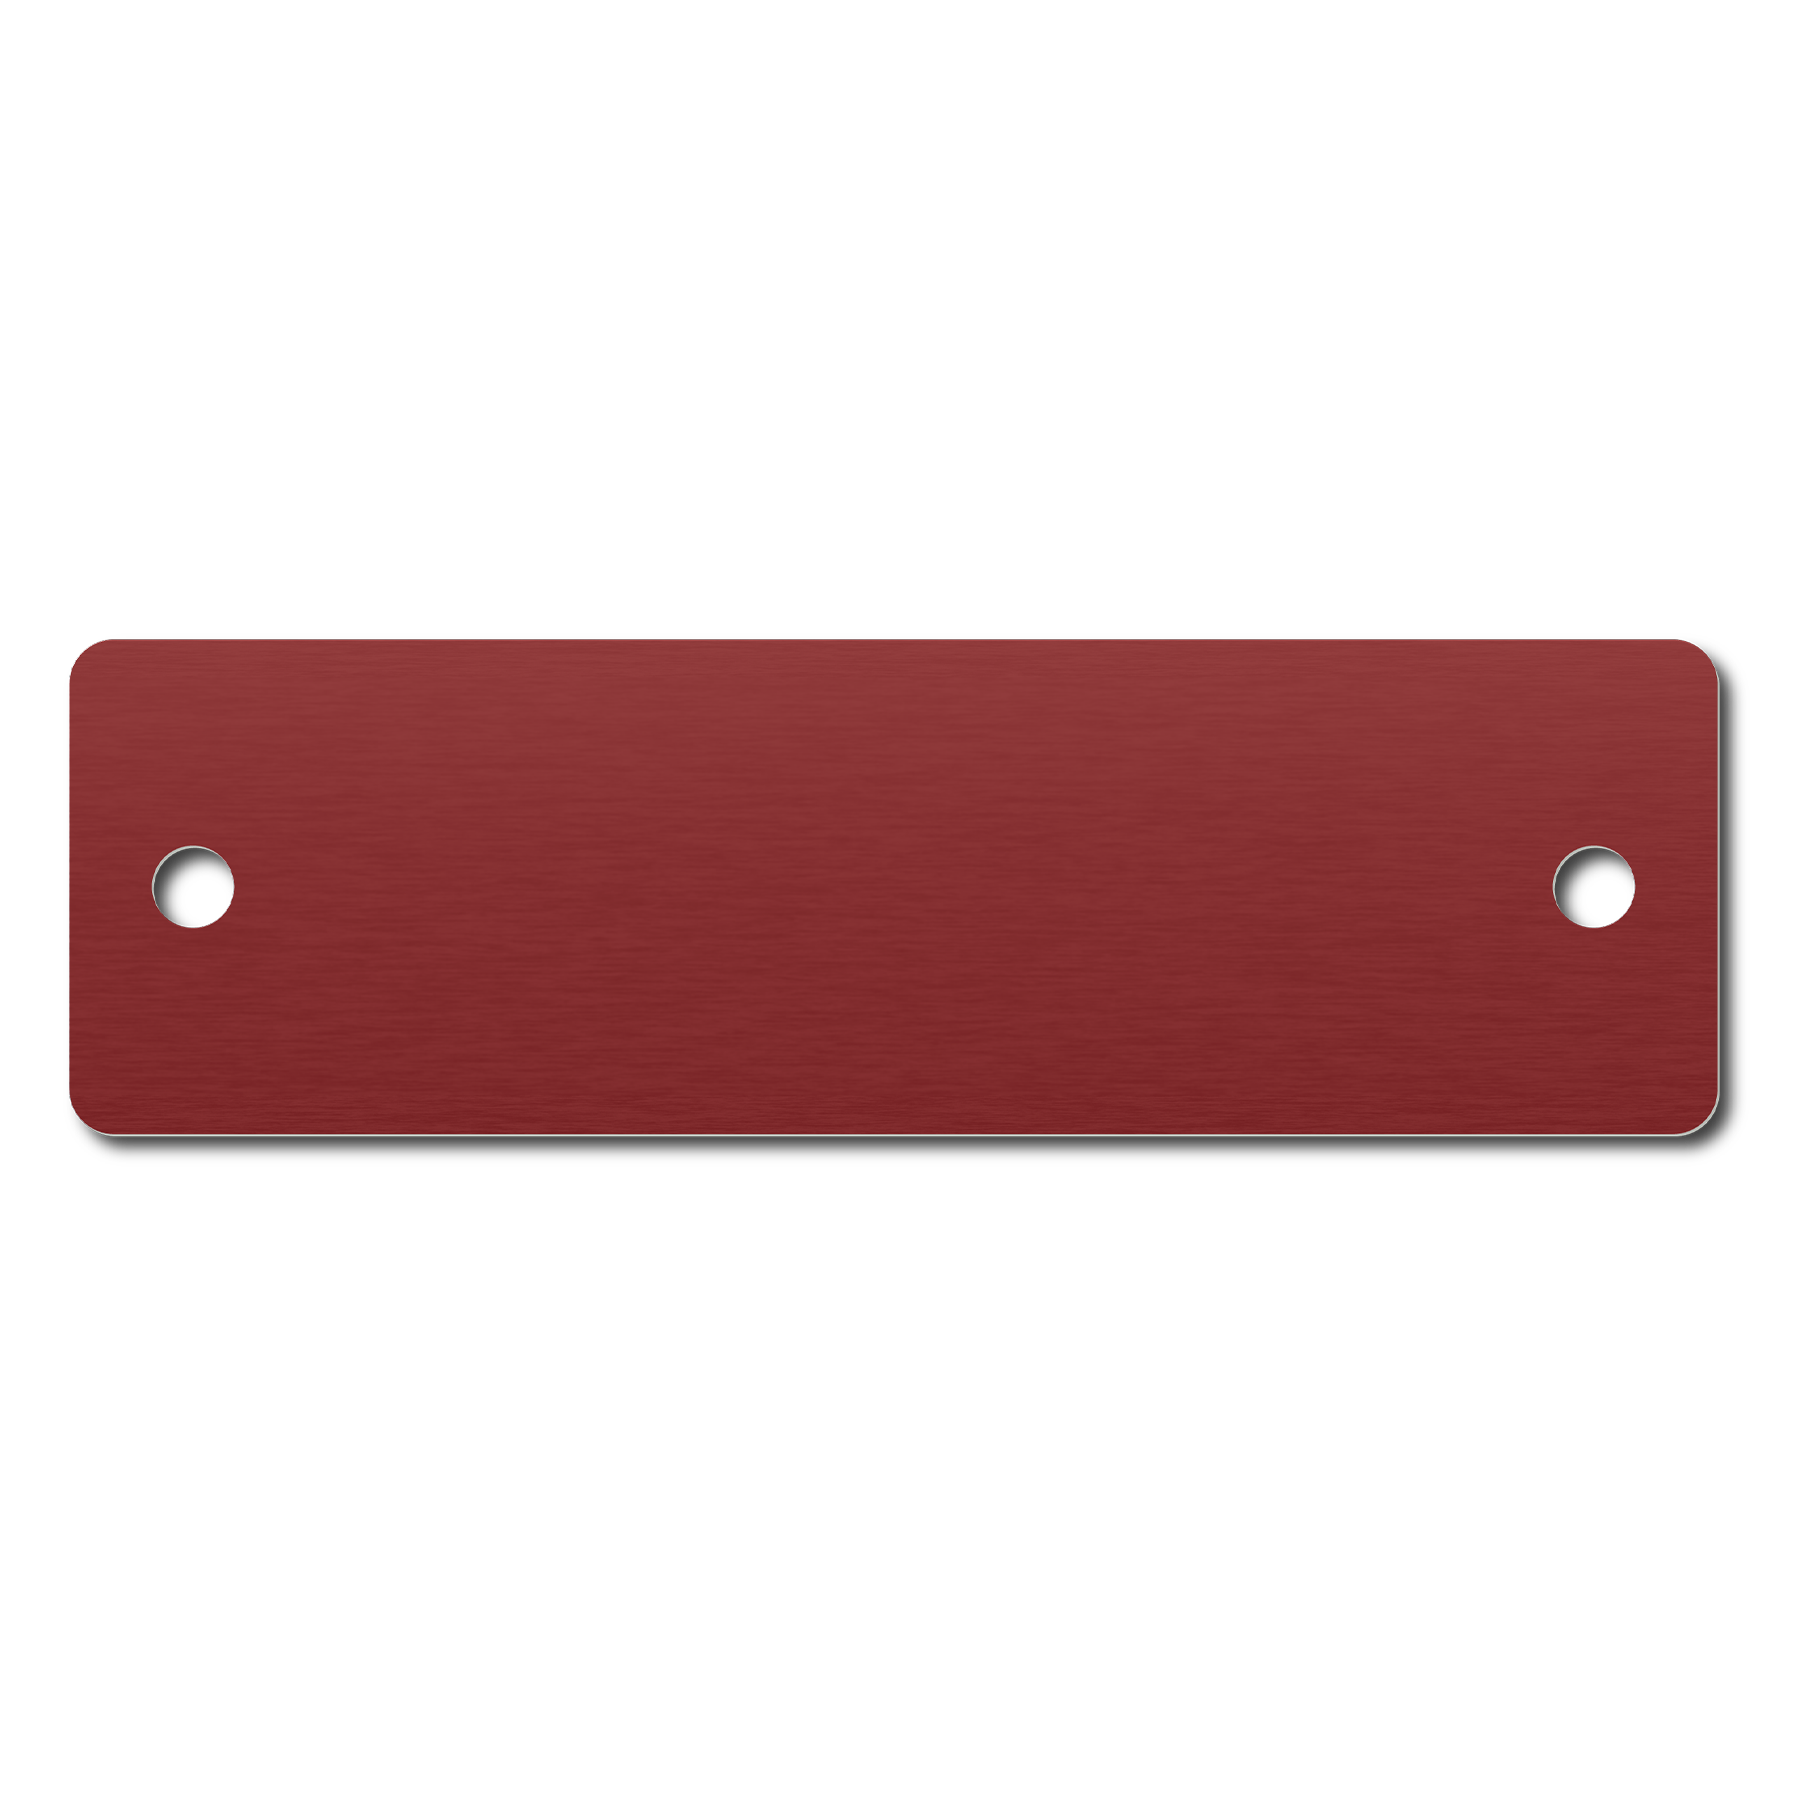 Anodized Aluminum Rectangle Tags, 3/4" x 2-1/2" with 1/8" Holes, Laser Engraved - Craftworks NW, LLC